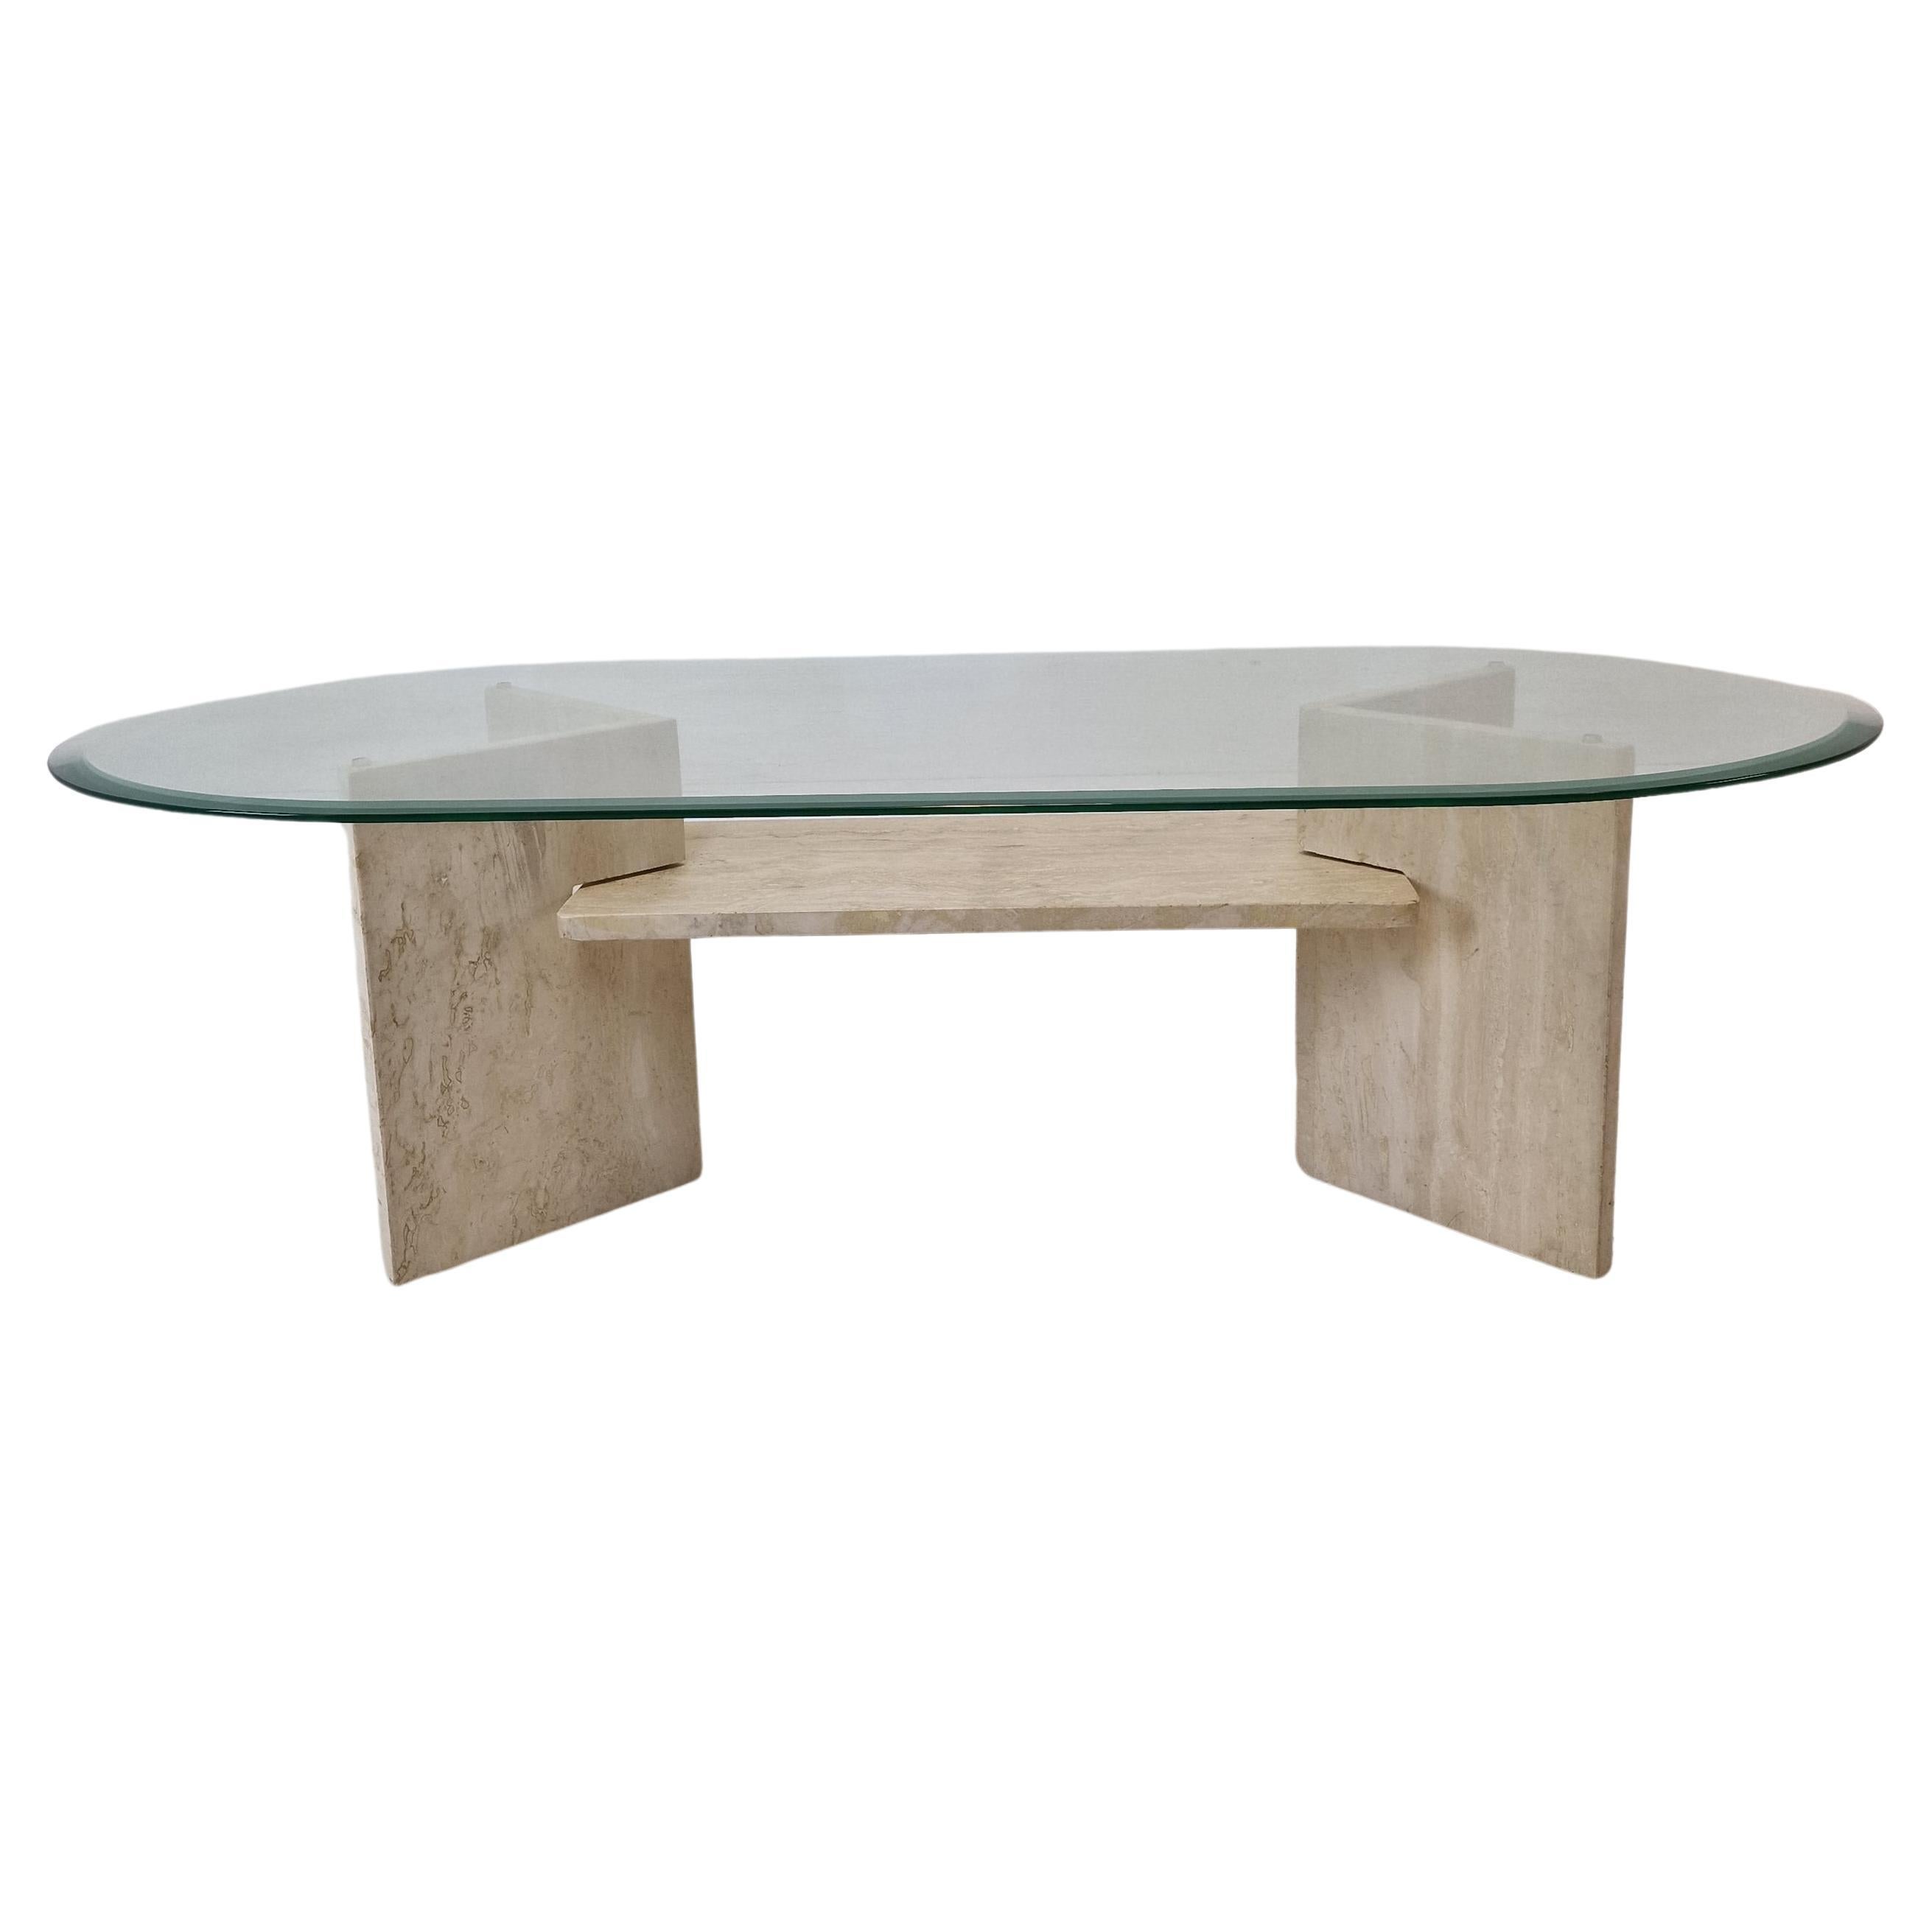 Italian Coffee Table in Travertine and Facet Cut Glass, 1980s For Sale